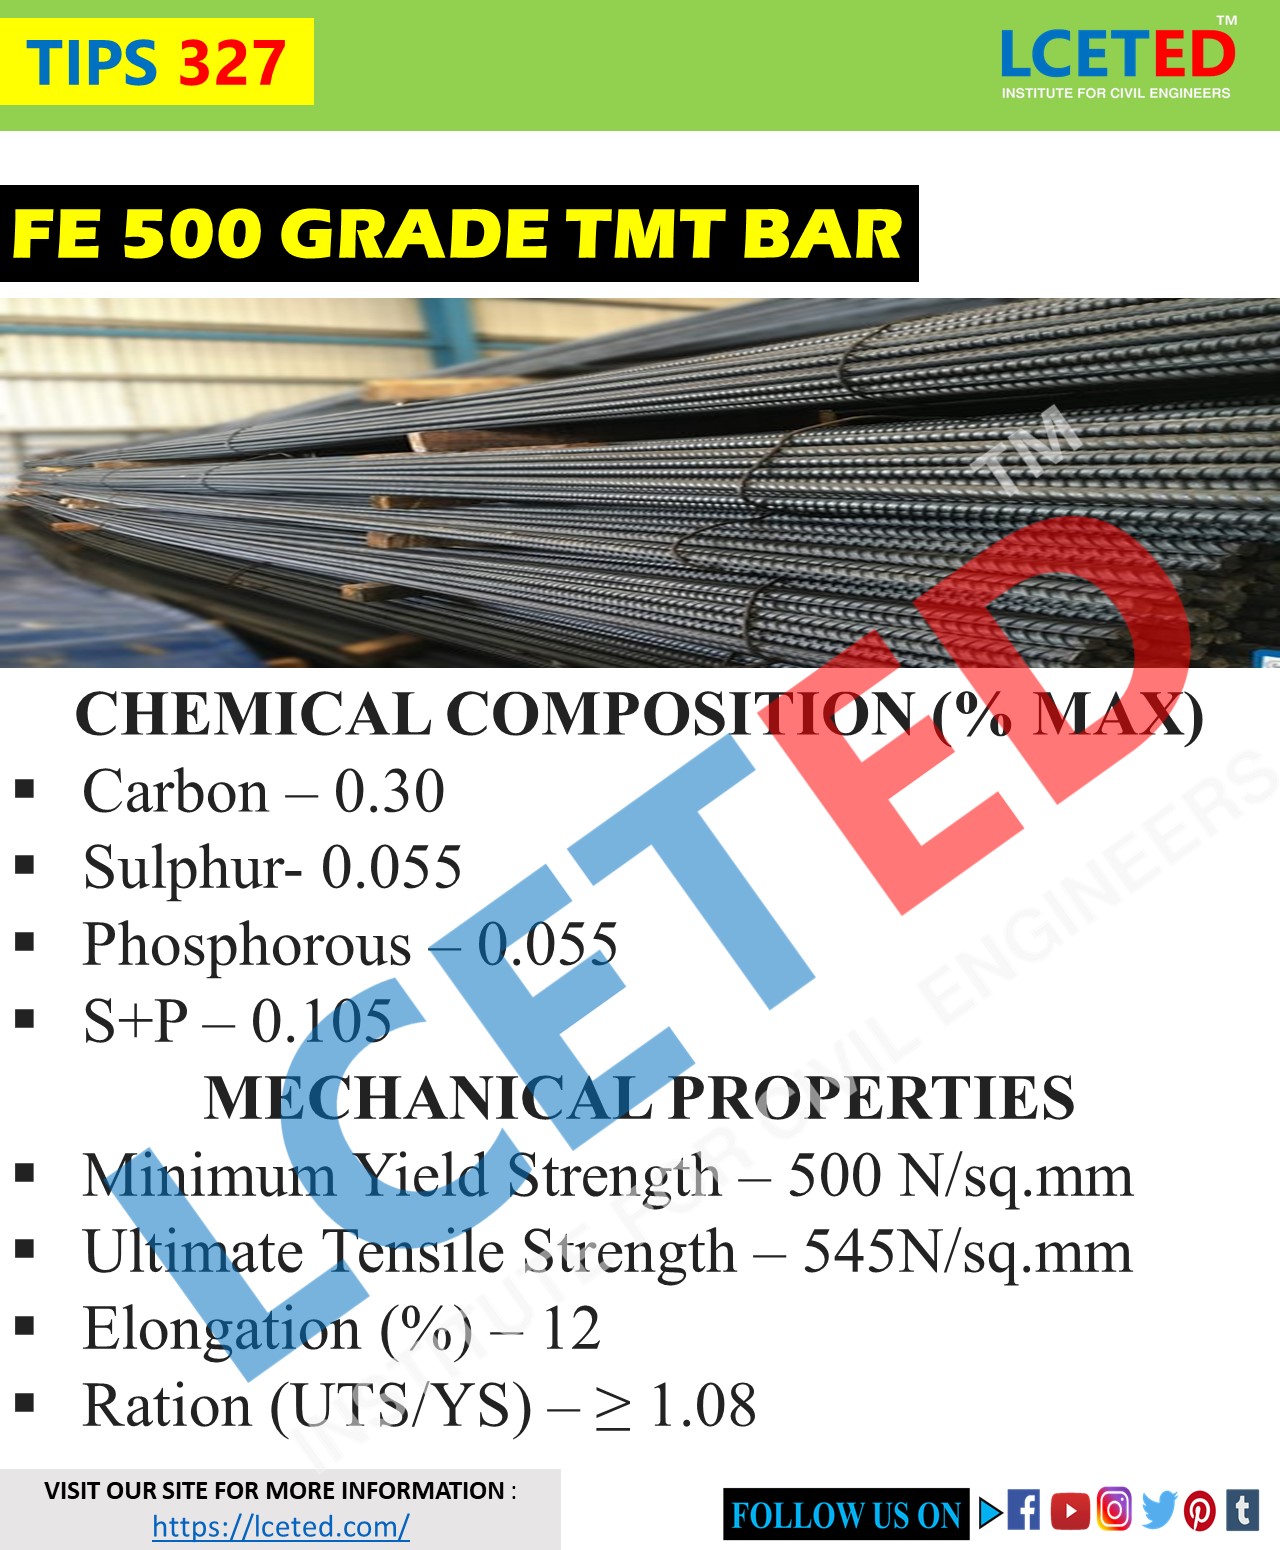 CHEMICAL COMPOSITION & MECHANICAL PROPERTIES OF FE500